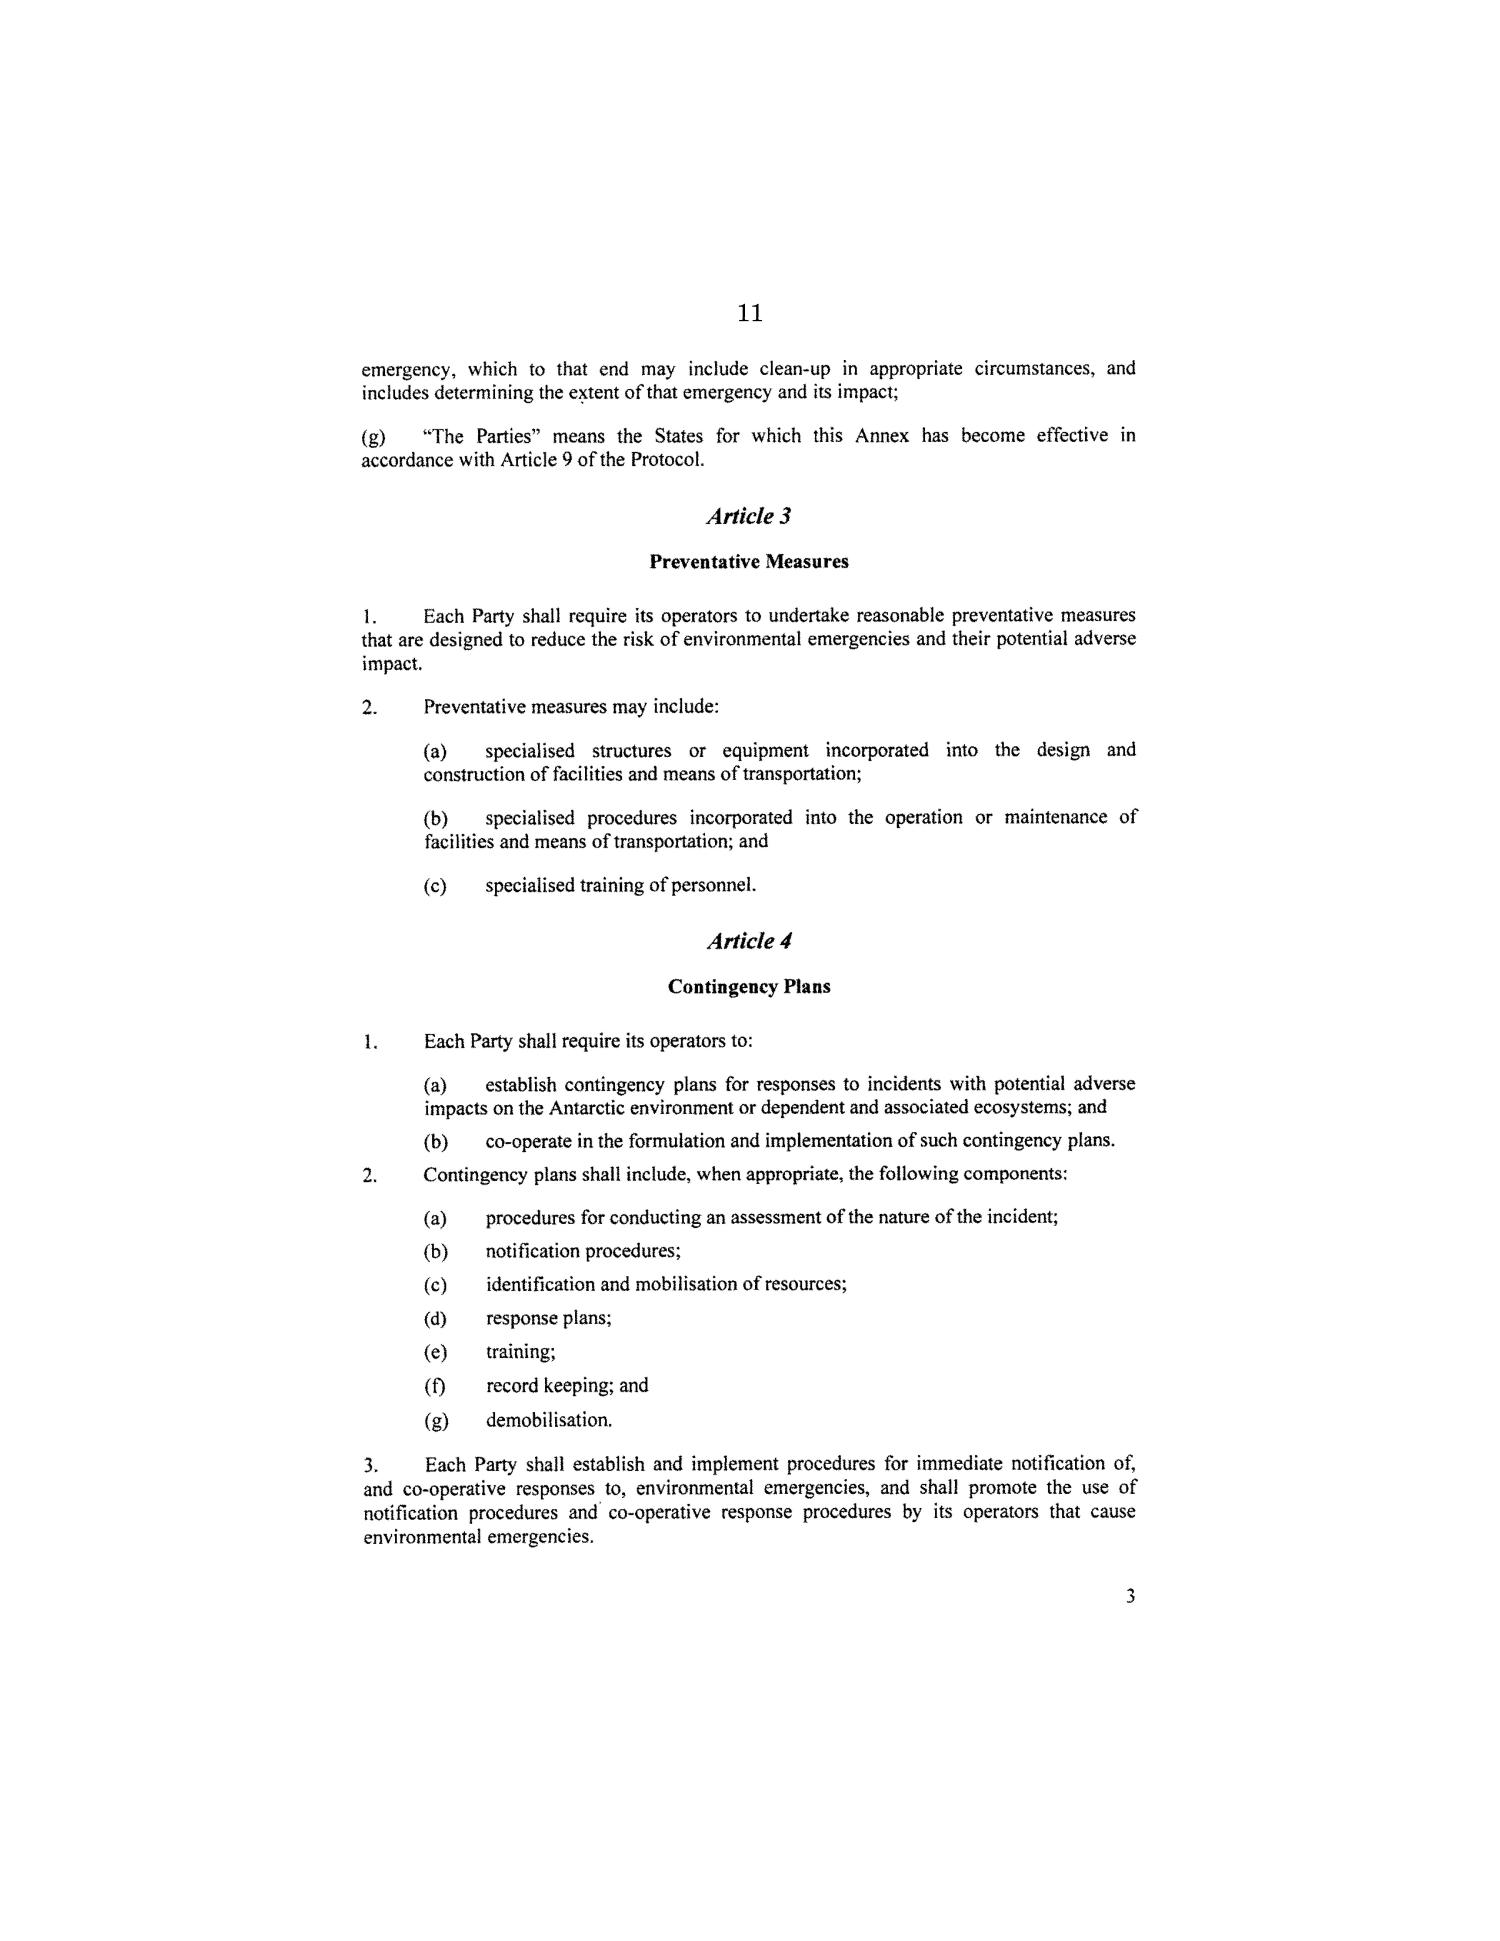 Annex VI to the Protocol of Environmental Protection to the Antarctic Treaty : message from the President of the United States transmitting Annex VI on liability arising from environmental emergencies to the Protocol on Environmental Protection to the Antarctic Treaty (Annex VI), adopted on June 14, 2005
                                                
                                                    11
                                                